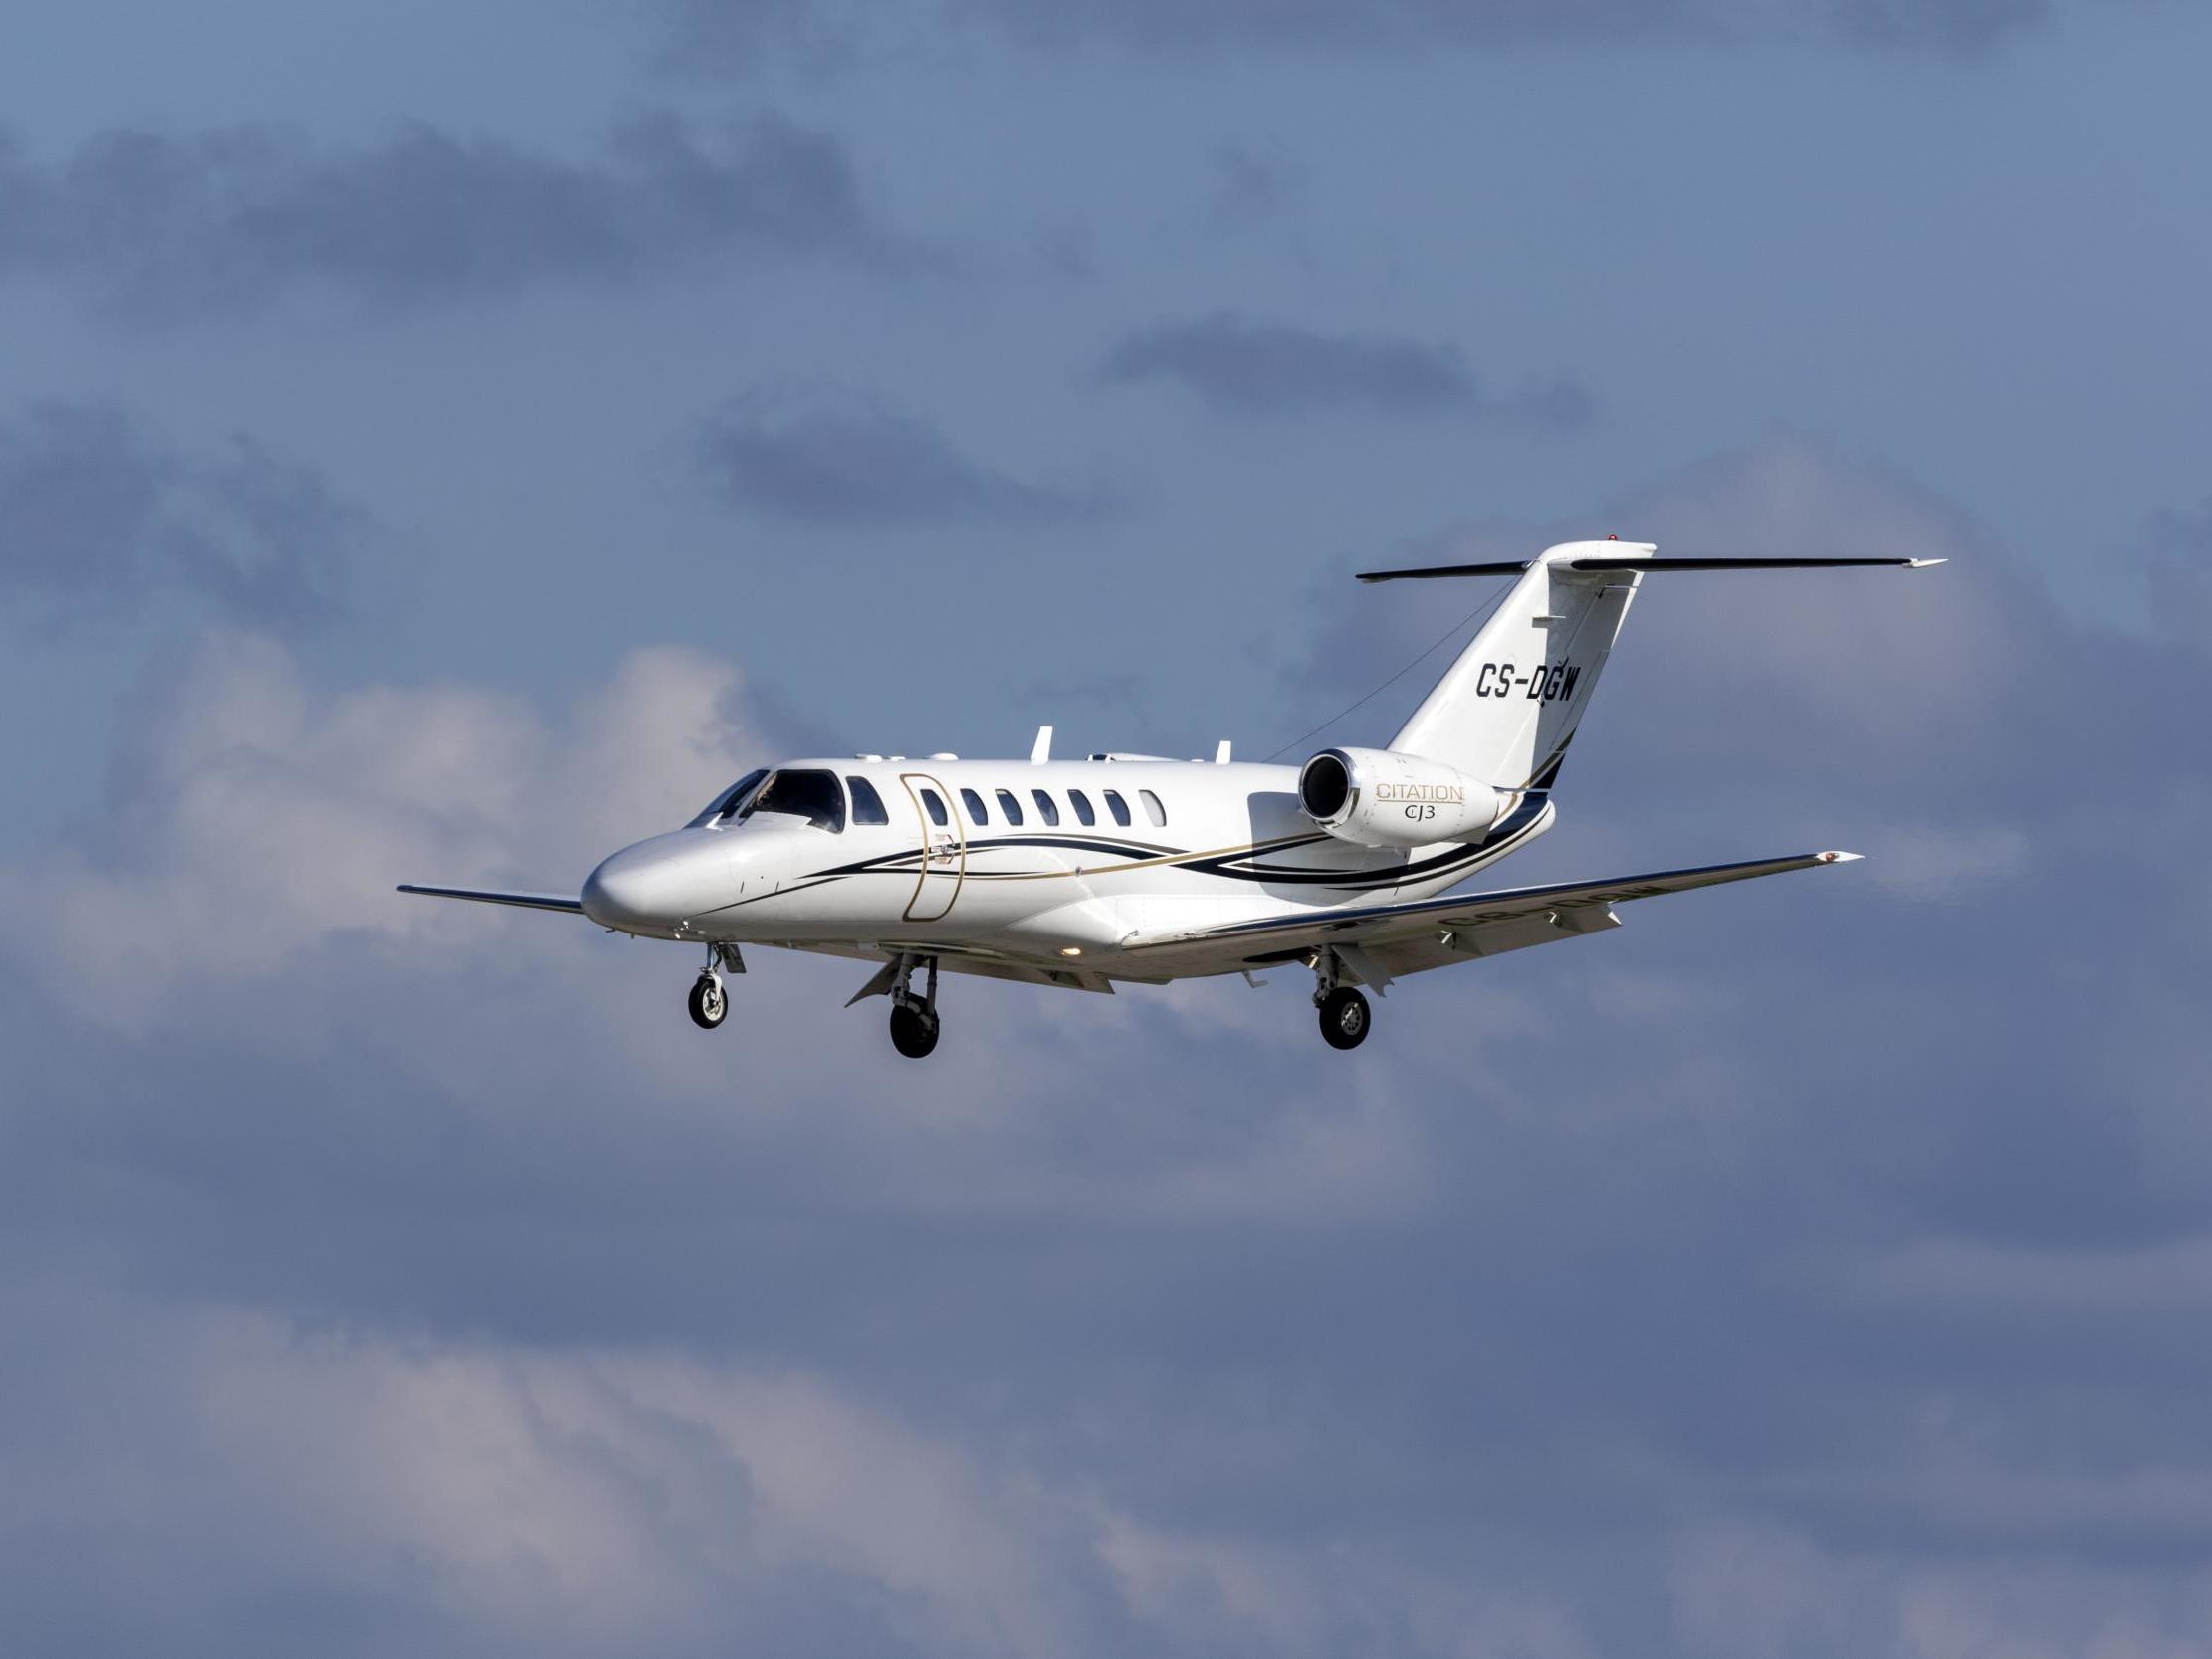 A Cessna Citation similar to the one that crashed into a Virginia mountain side on Sunday afternoon (File photo)